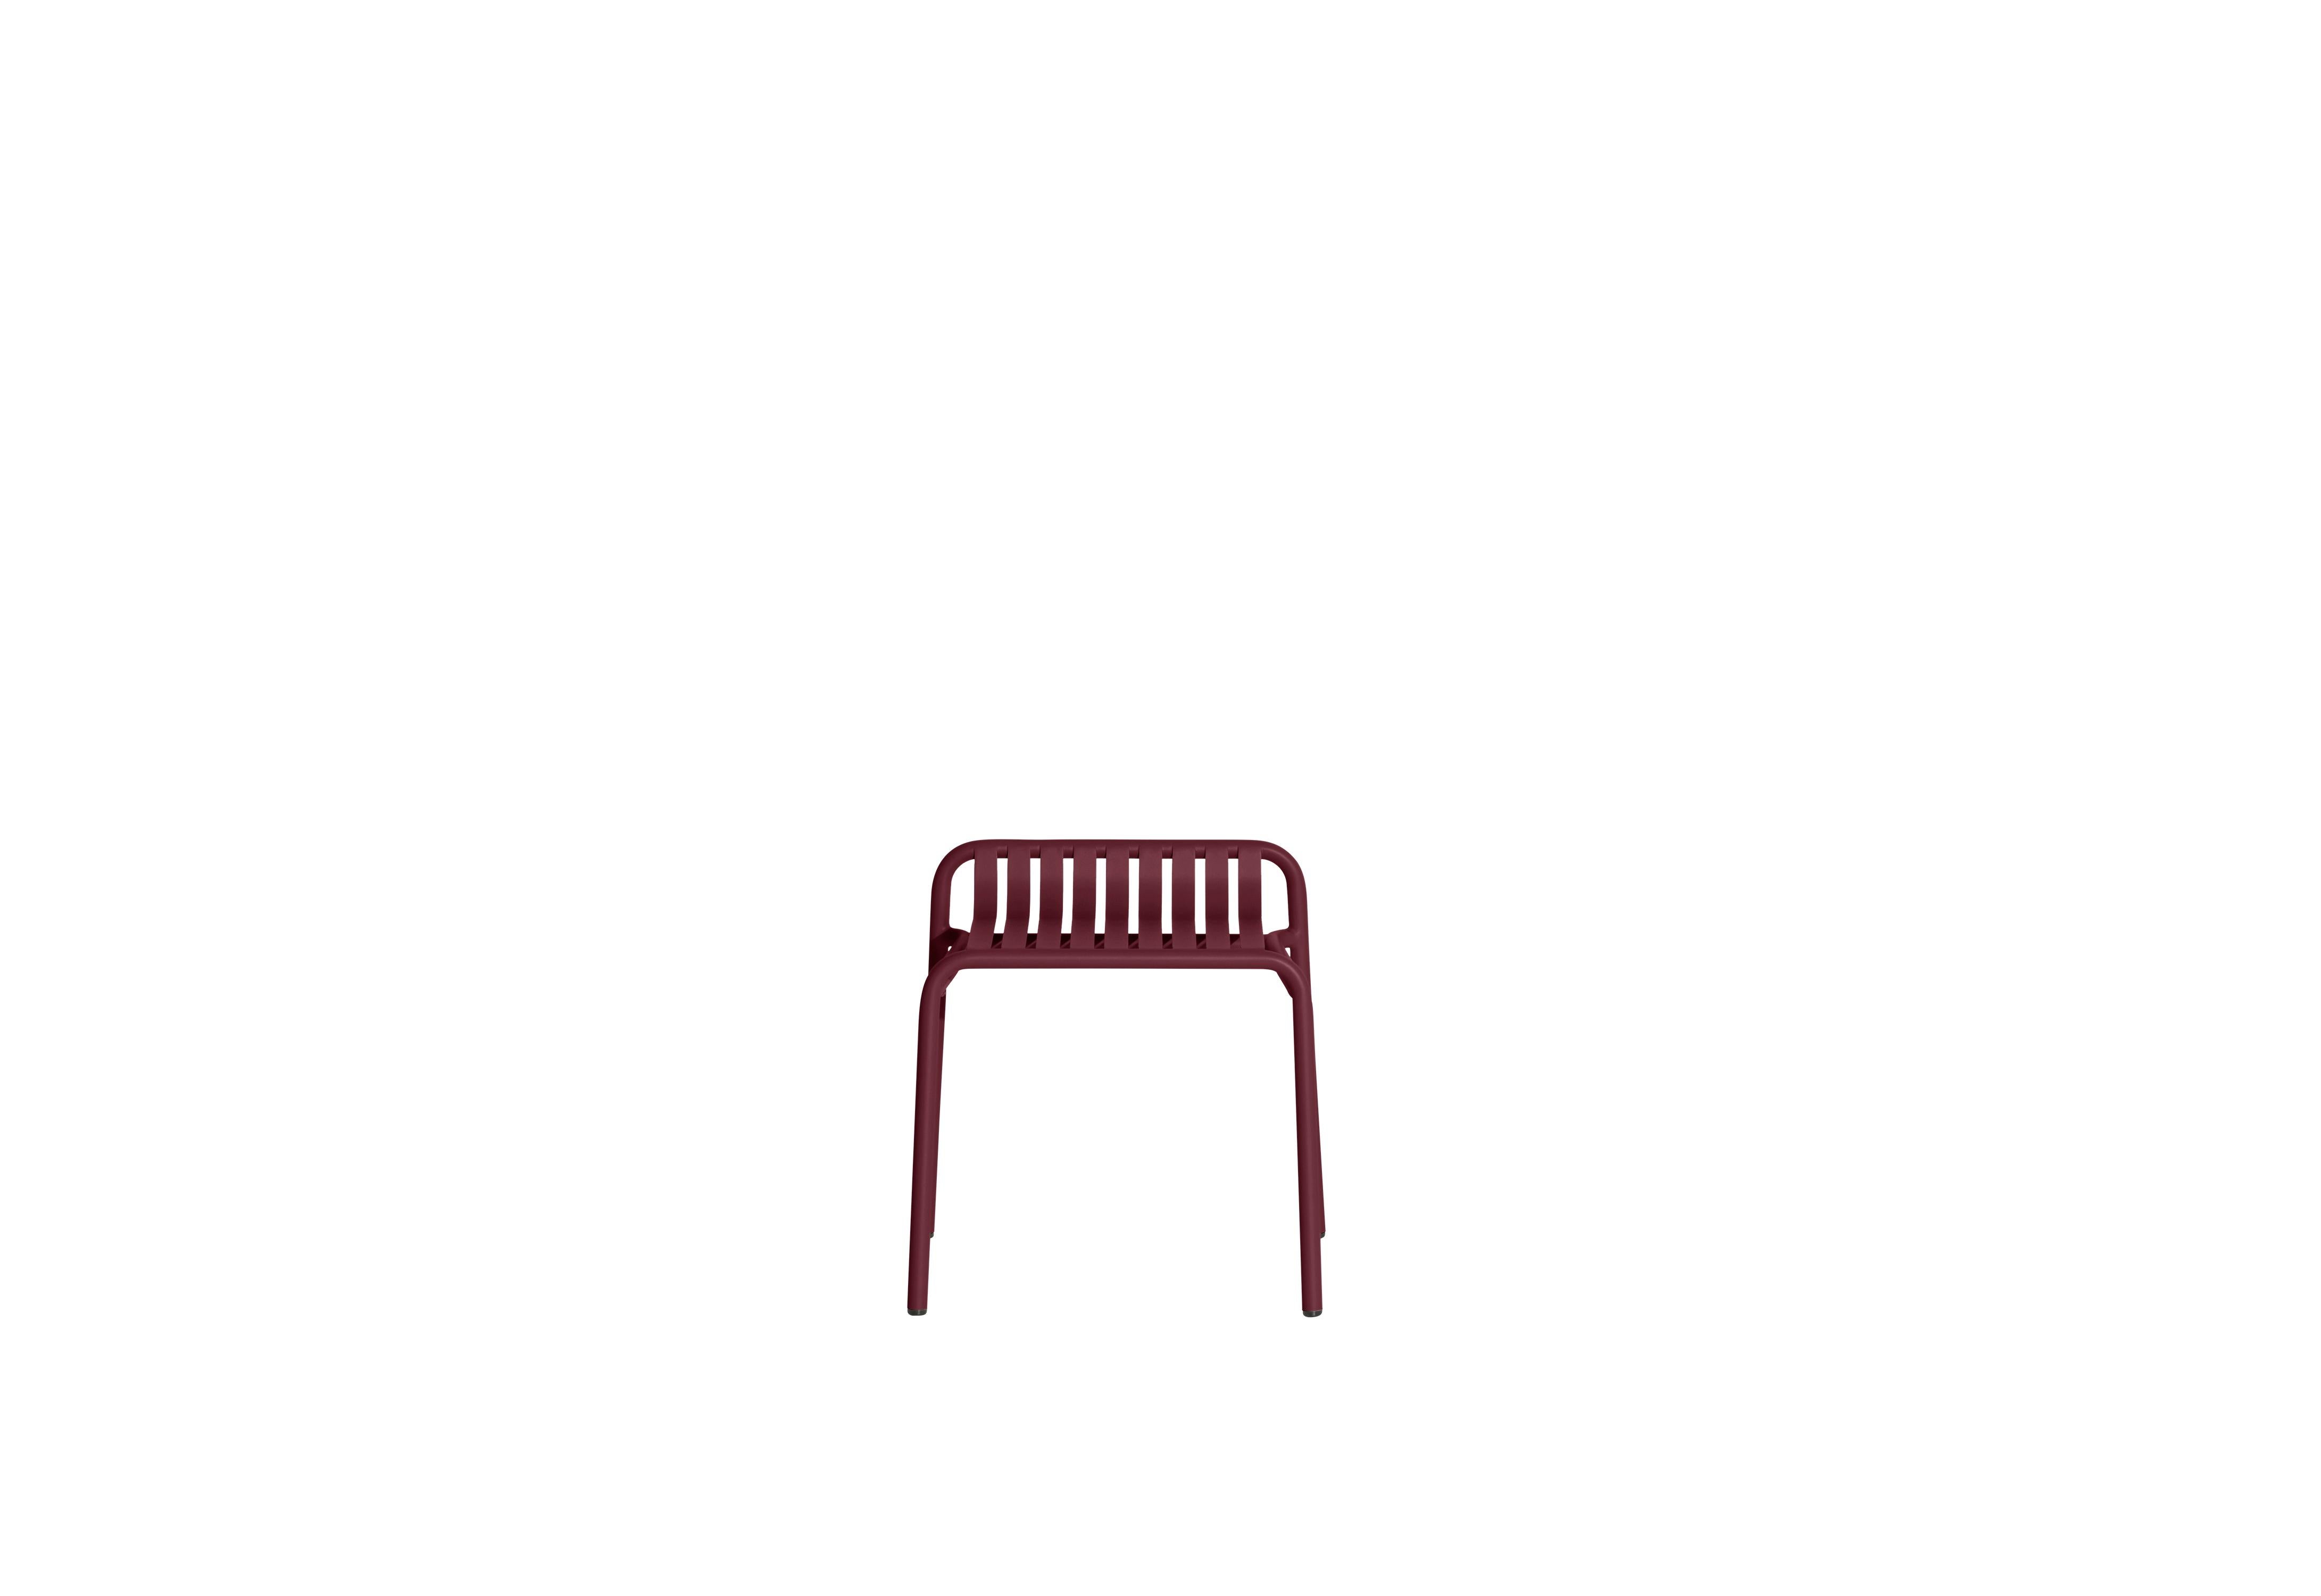 Petite Friture Week-End Stool in Burgundy Aluminium by Studio BrichetZiegler, 2017

The week-end collection is a full range of outdoor furniture, in aluminium grained epoxy paint, matt finish, that includes 18 functions and 8 colours for the